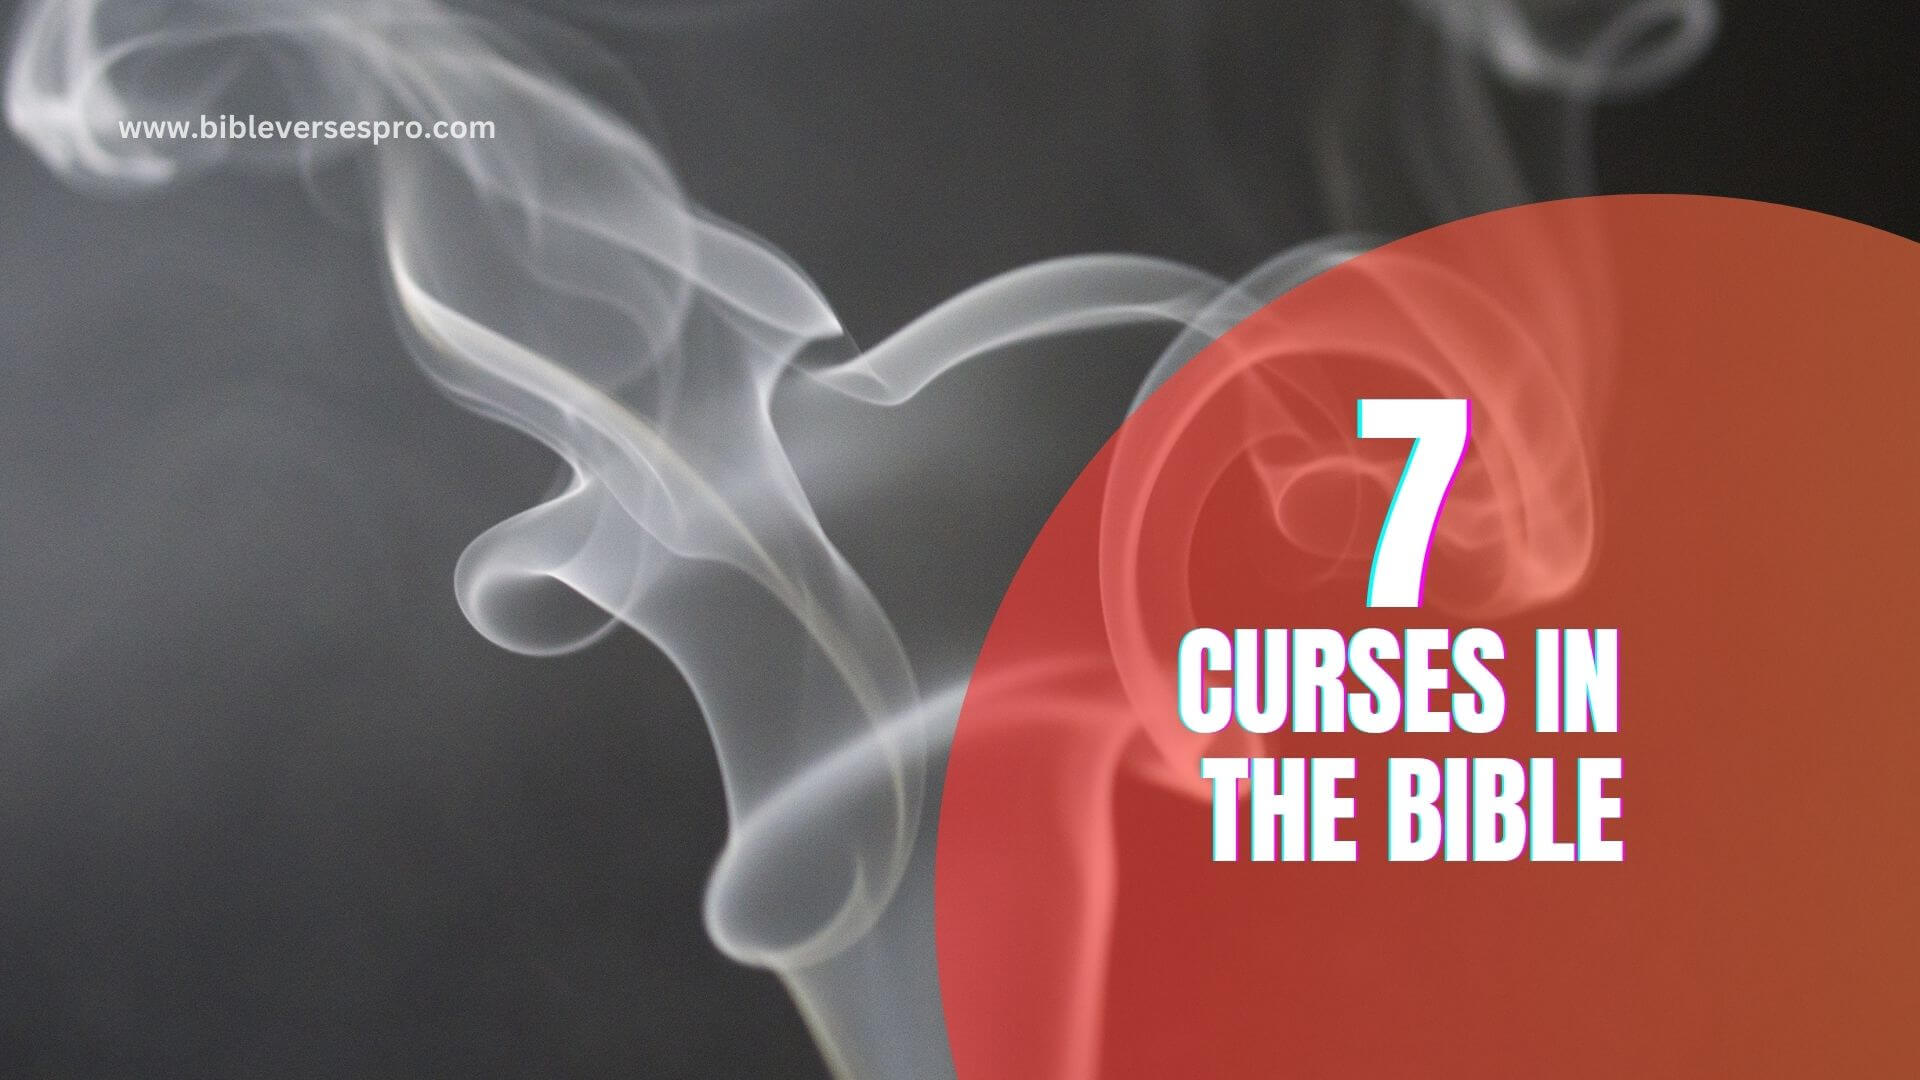 CURSES IN THE BIBLE (1)